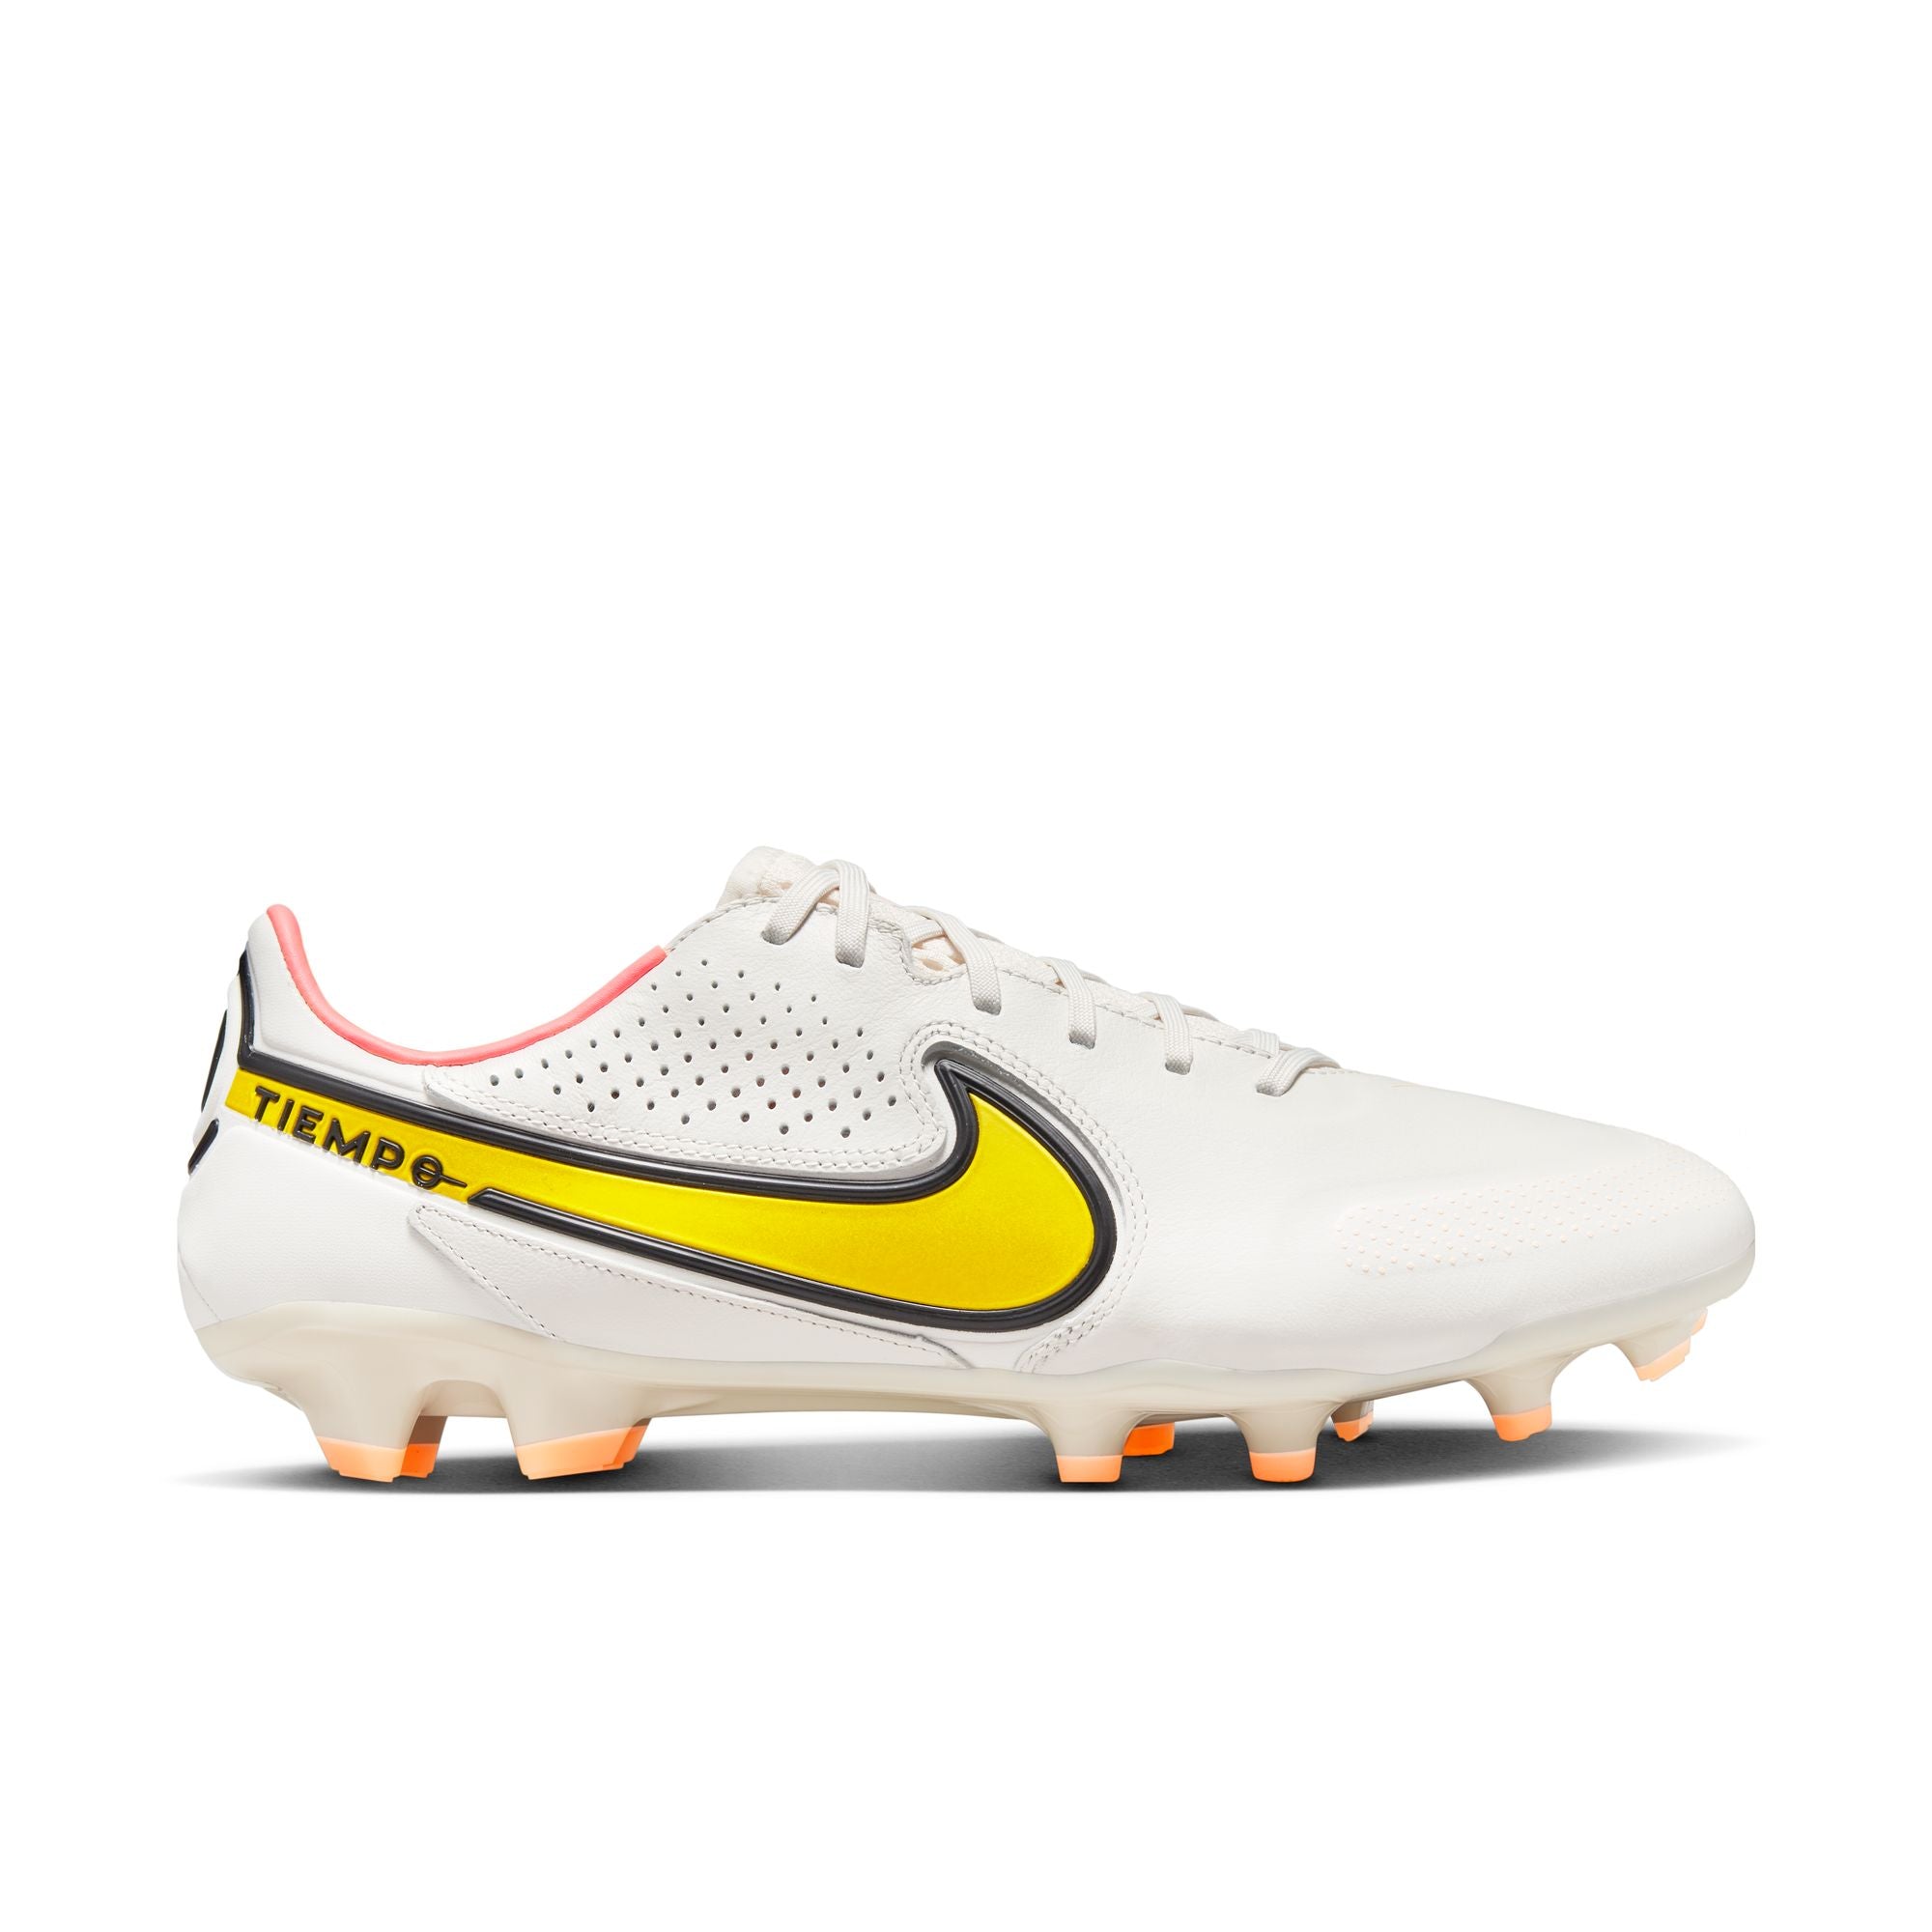 Nike Tiempo Legend 9 FG Firm-Ground Soccer Cleat White